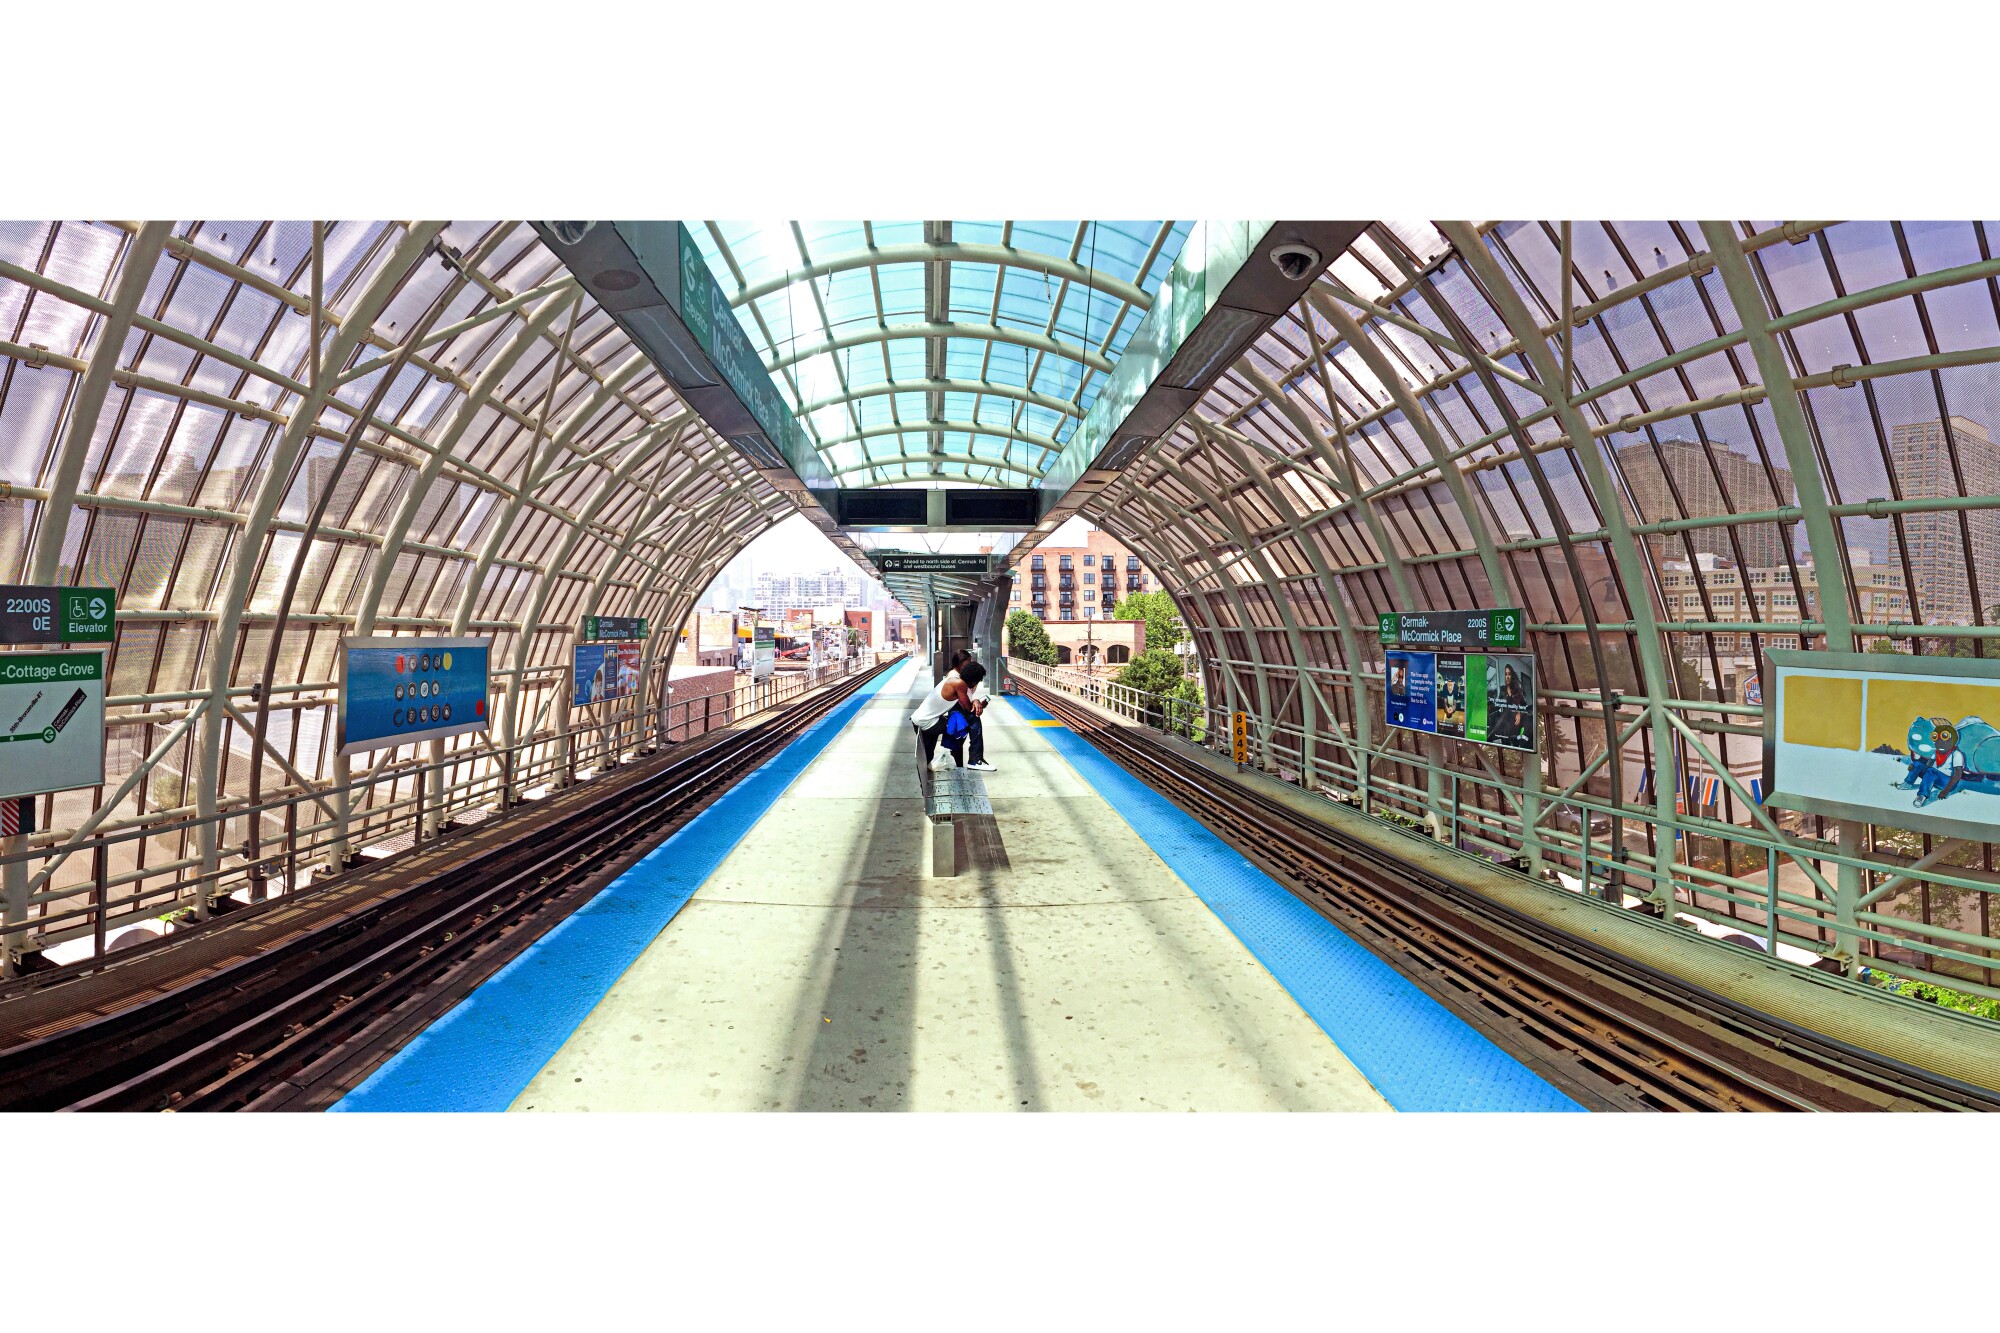 The platform and rails of one stop covered by a glass windowed tunnel on the elevated train system in Chicago. June 2018.